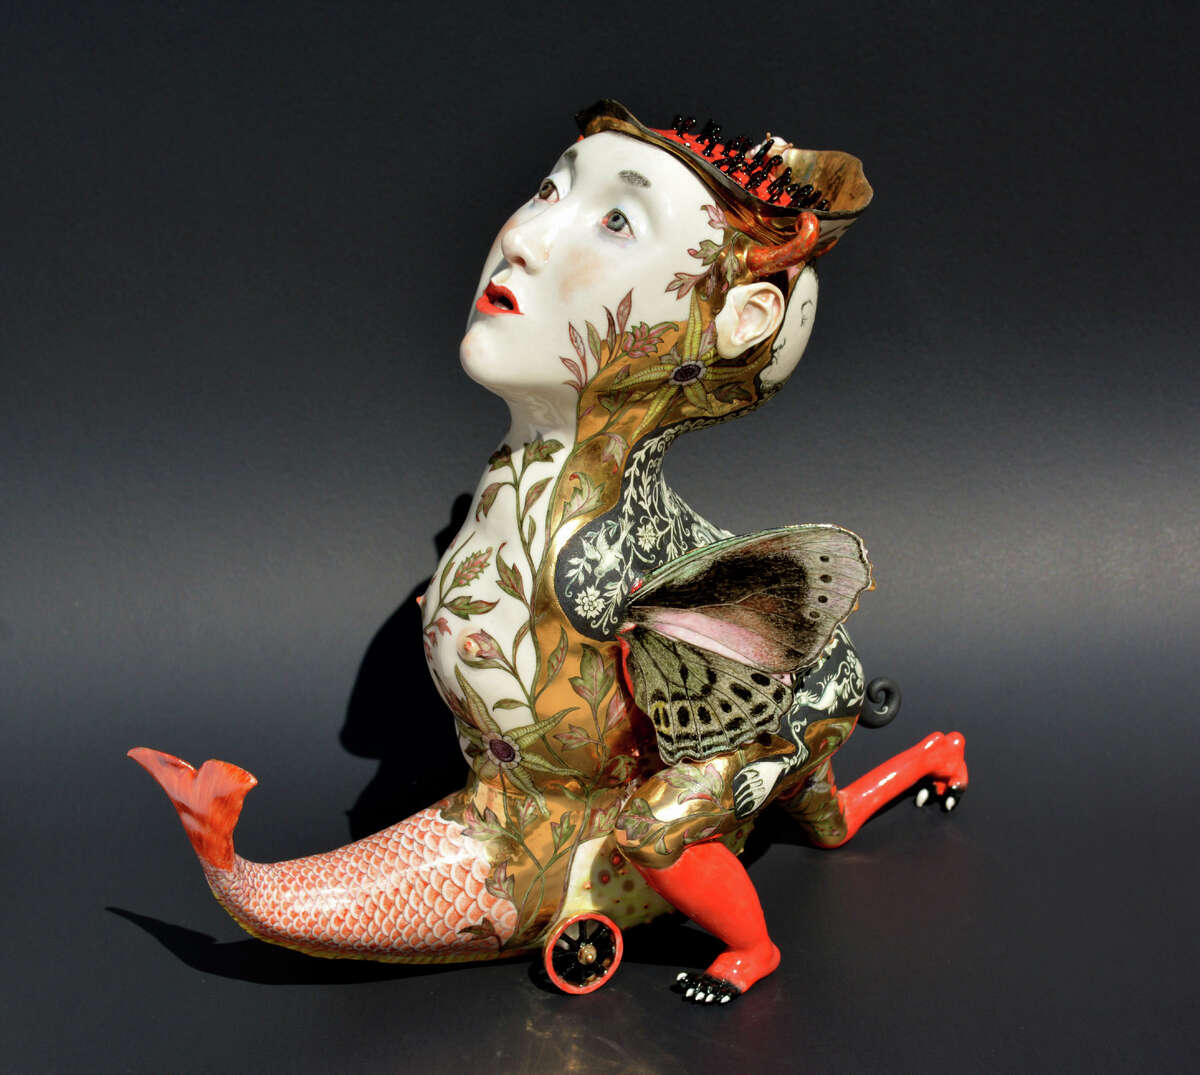 Irina Zaytceva's "Metamorfoza," made of porcelain, paint and gold luster, will be among works presented by Duane Reed Gallery at the Texas Contemporary Art Fair.